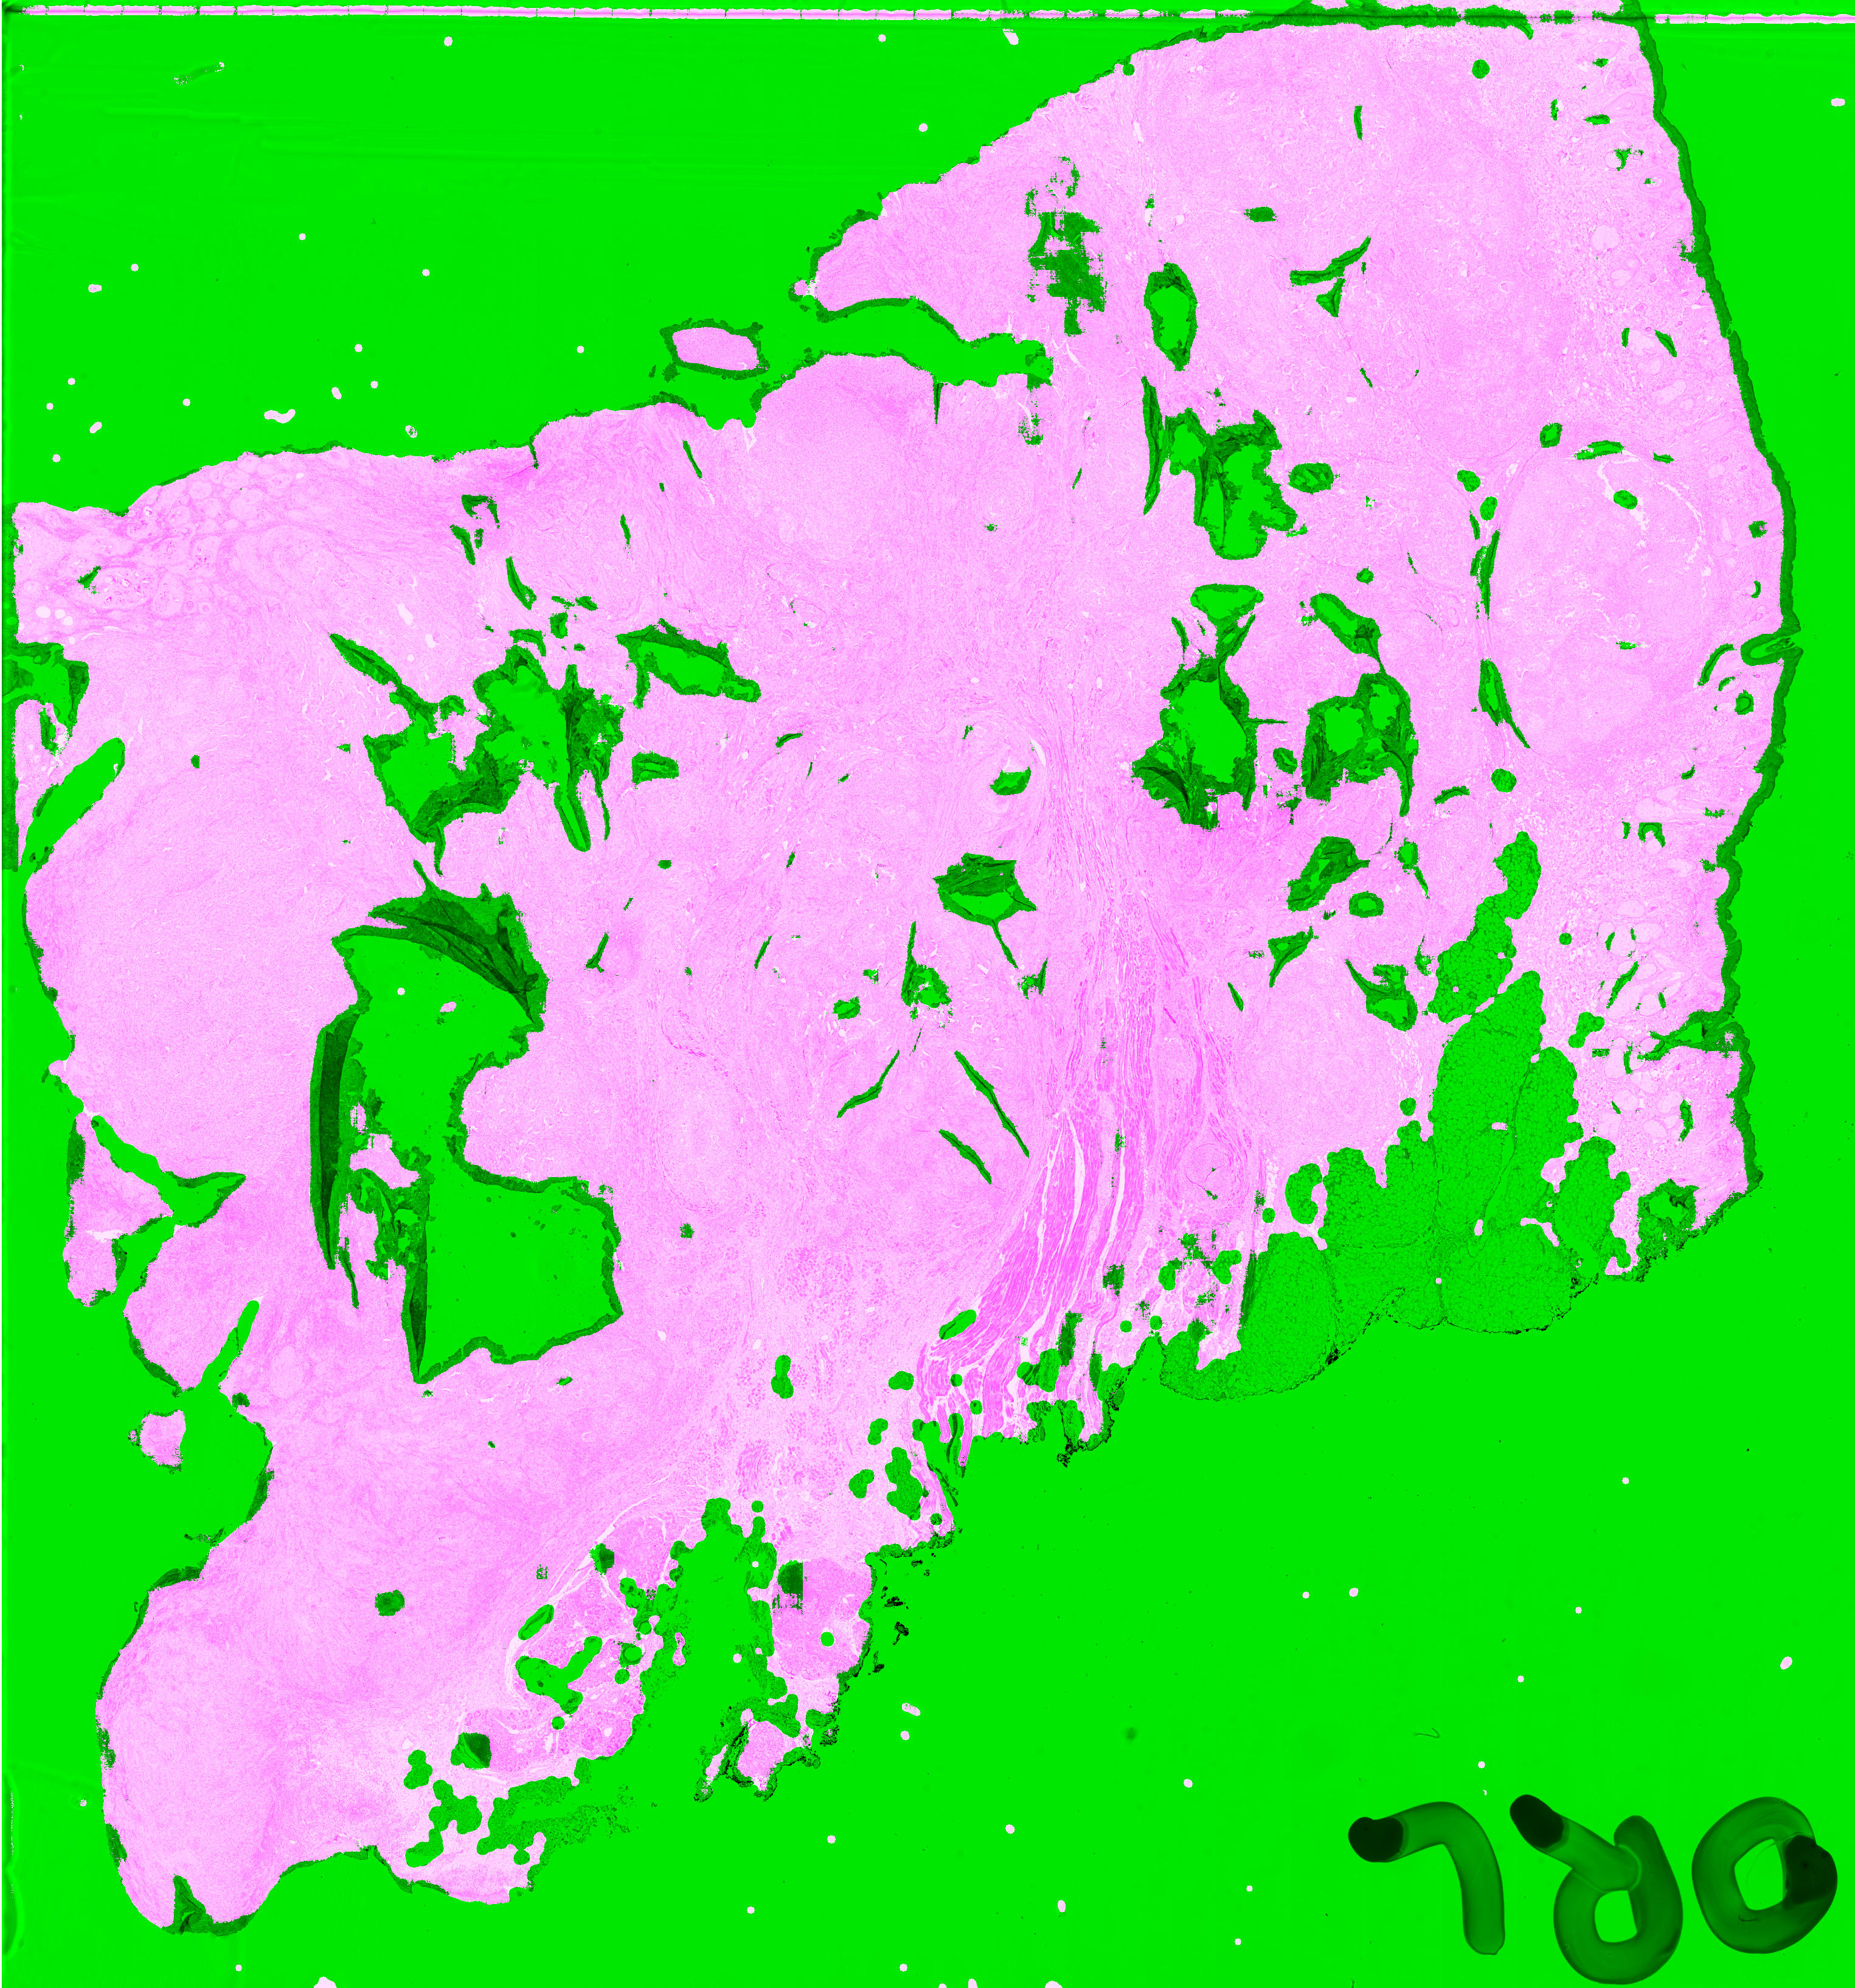 Figure 6.10. Prediction of artefactual regions of the PAN-GA50 network on the Block C slide. Detected artefacts and background are shown in green, normal tissue is shown in pink.